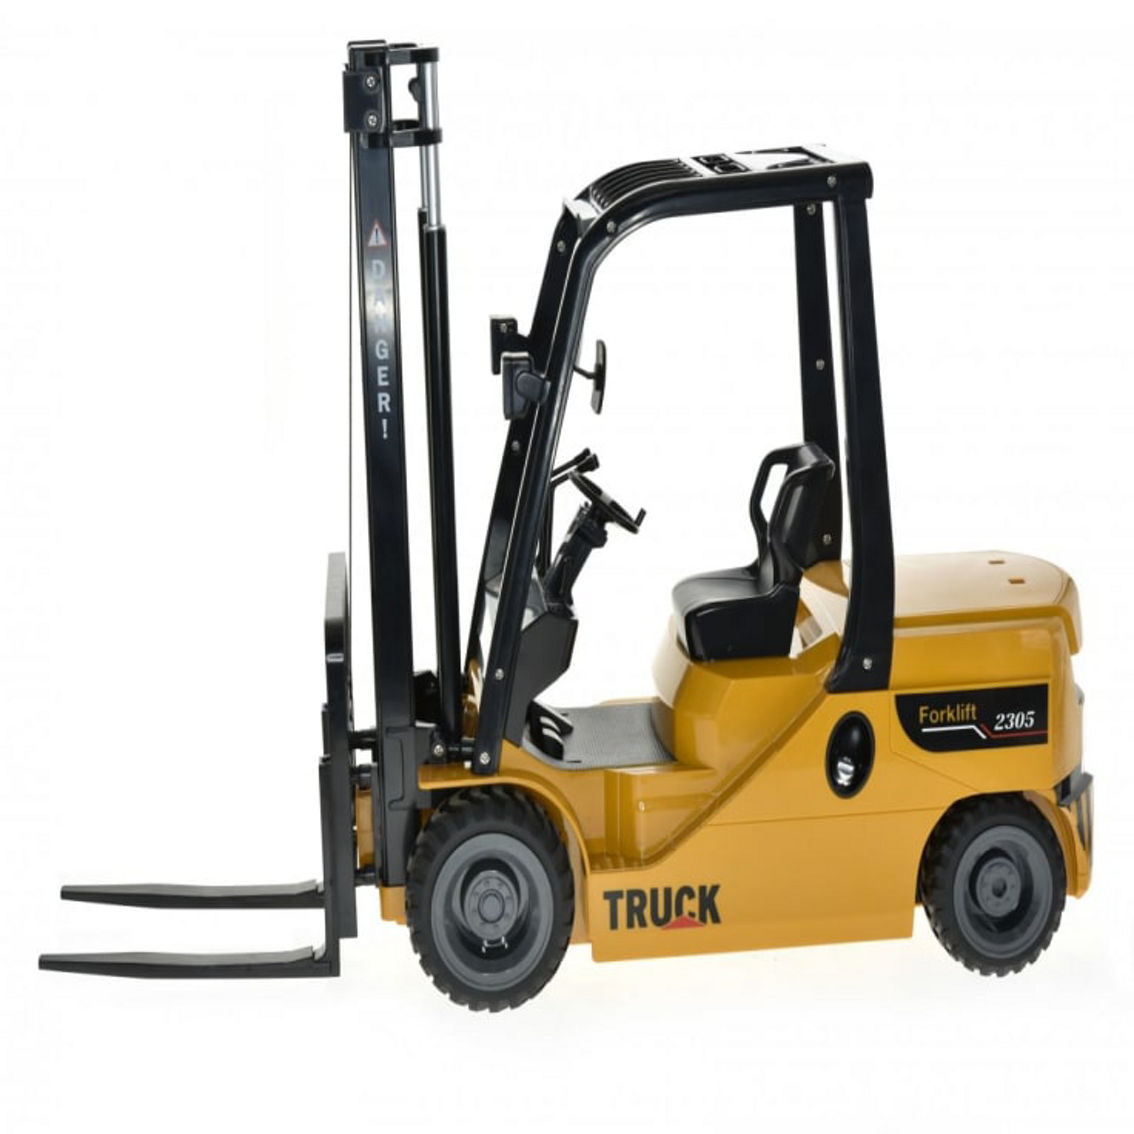 CIS-2305 1:14 scale fork lift with lights sound 2.4 GHz rechargeable batteries - Image 4 of 5